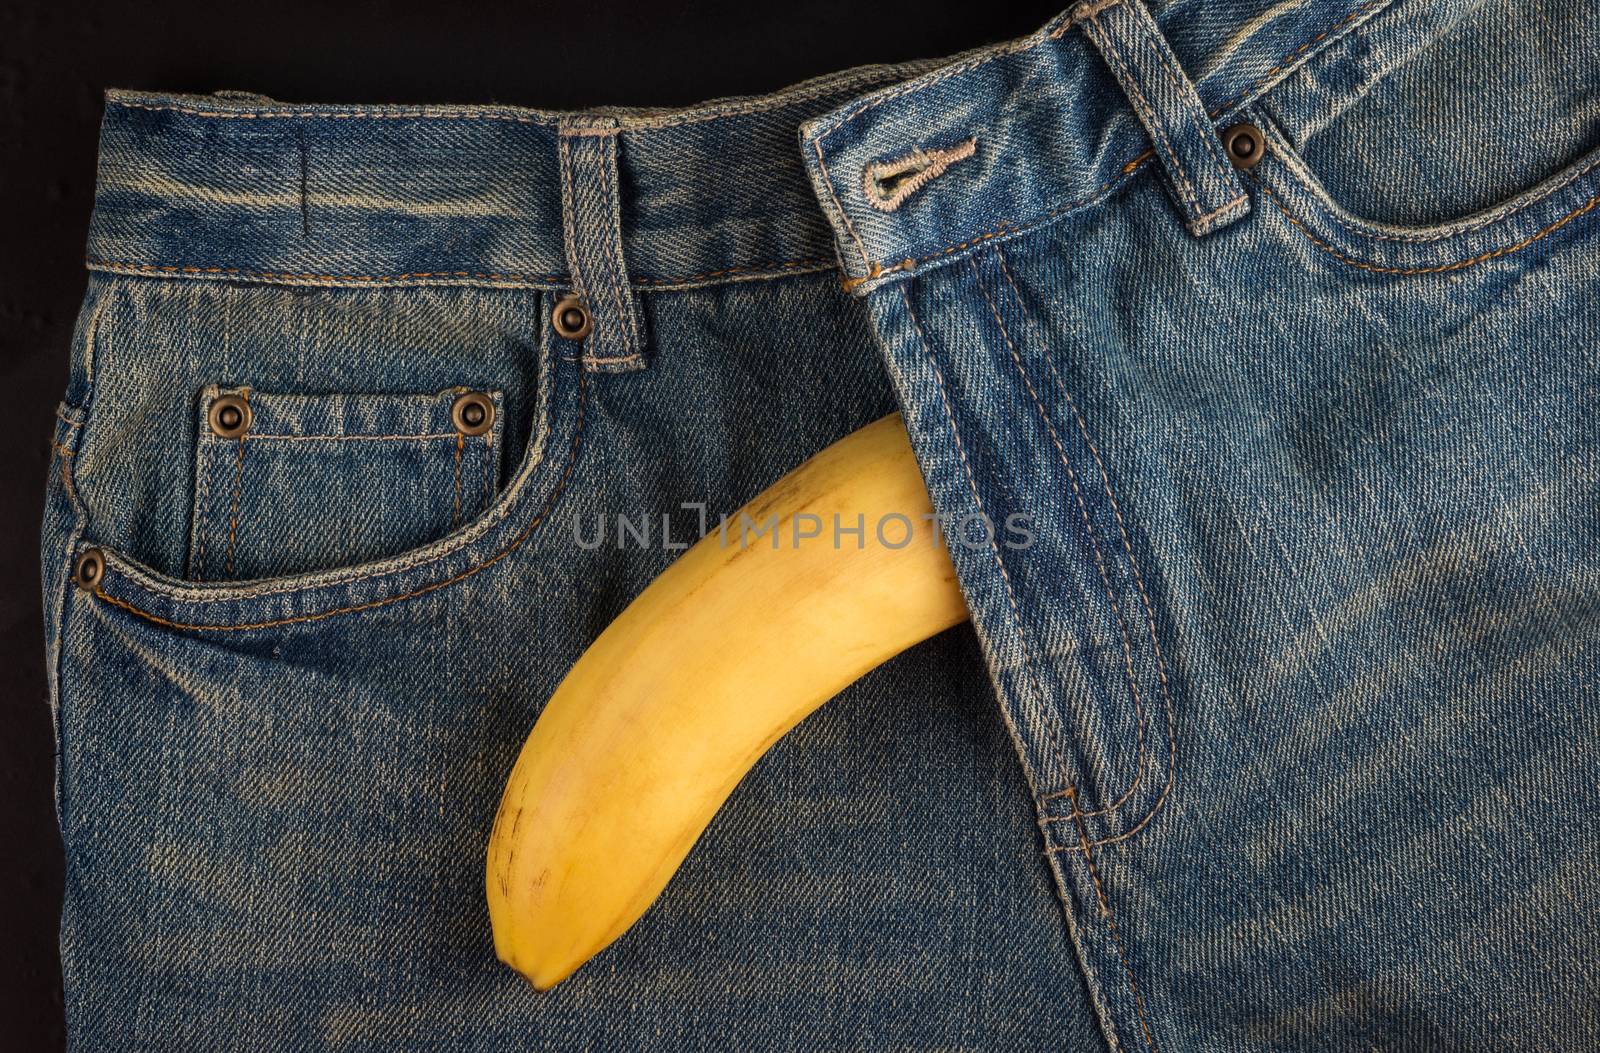 Big Banana and men's jeans, like the penis, top view